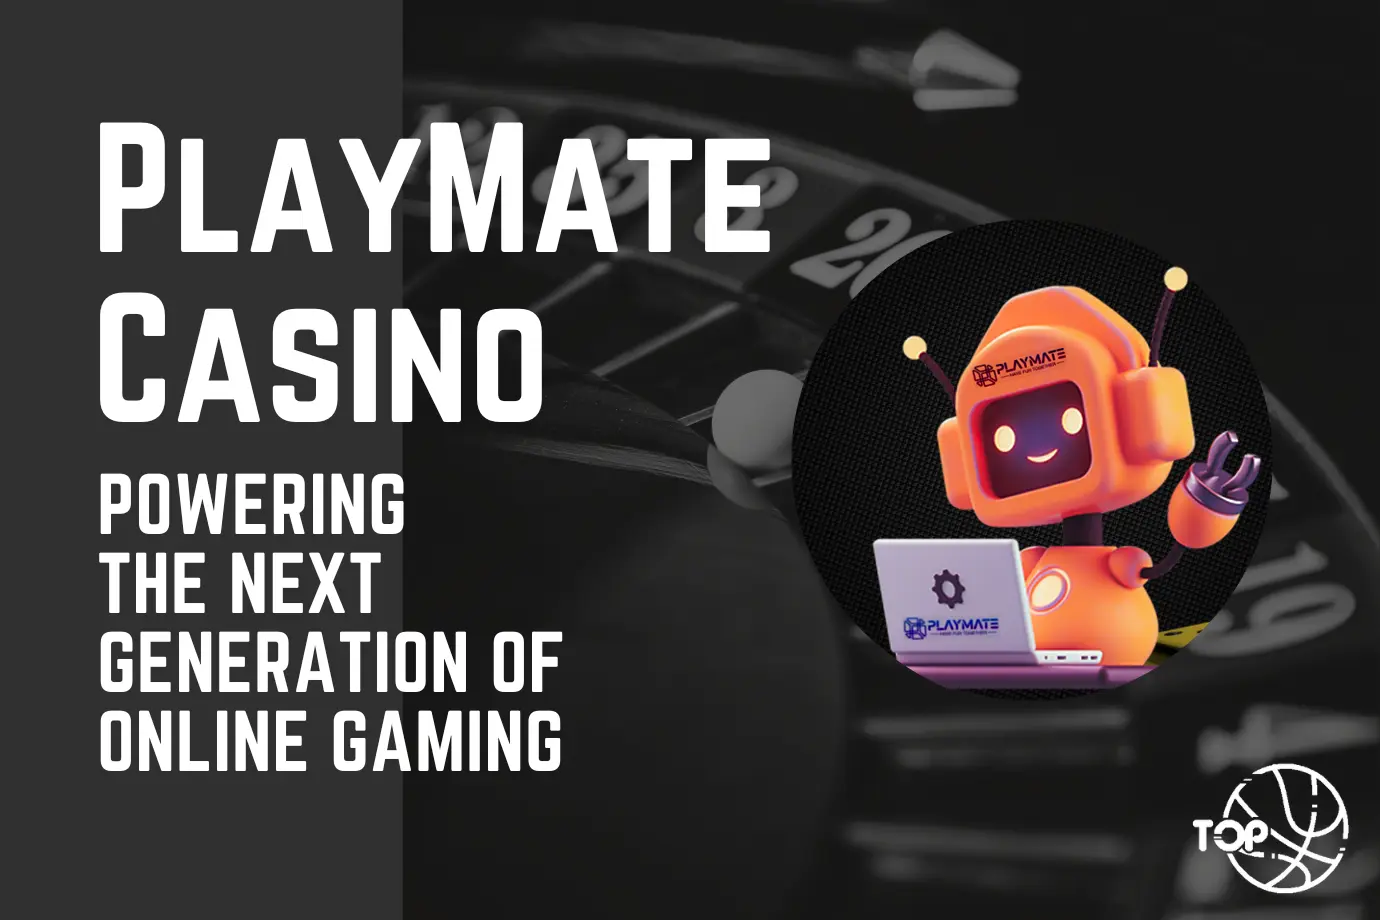 Playmate Casino: Powering the Next Generation of Online Gaming